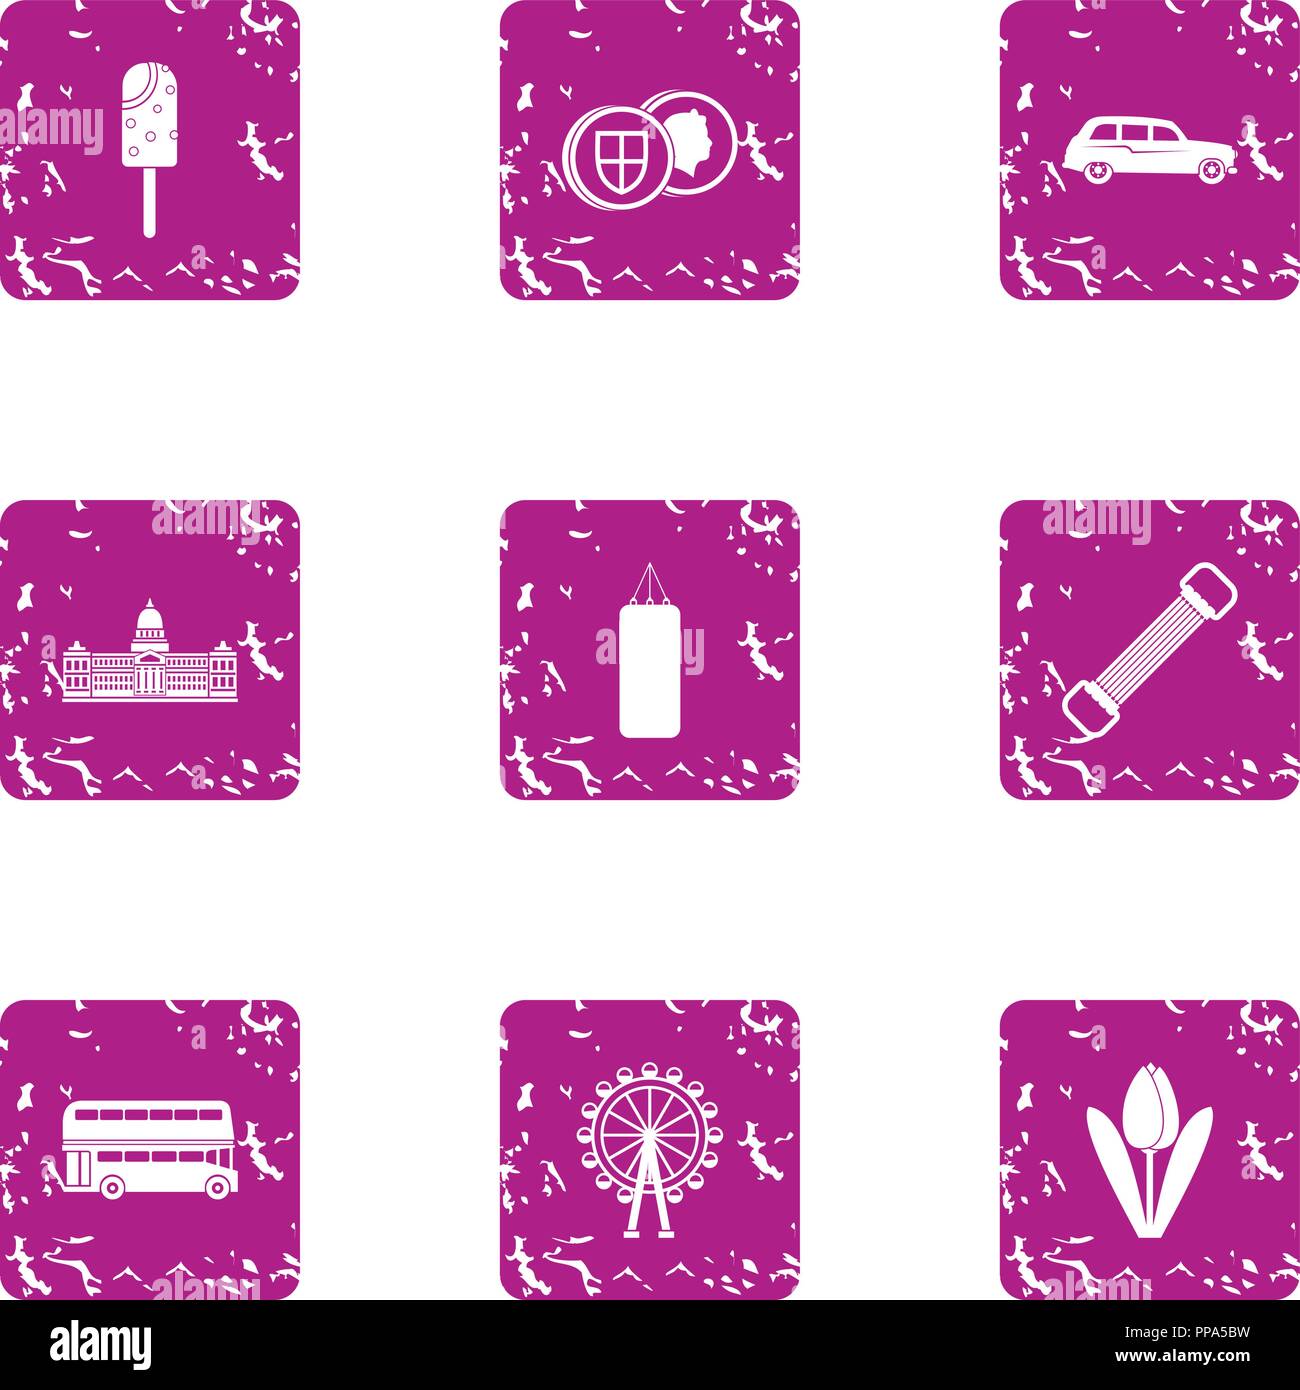 Park day icons set, grunge style Stock Vector